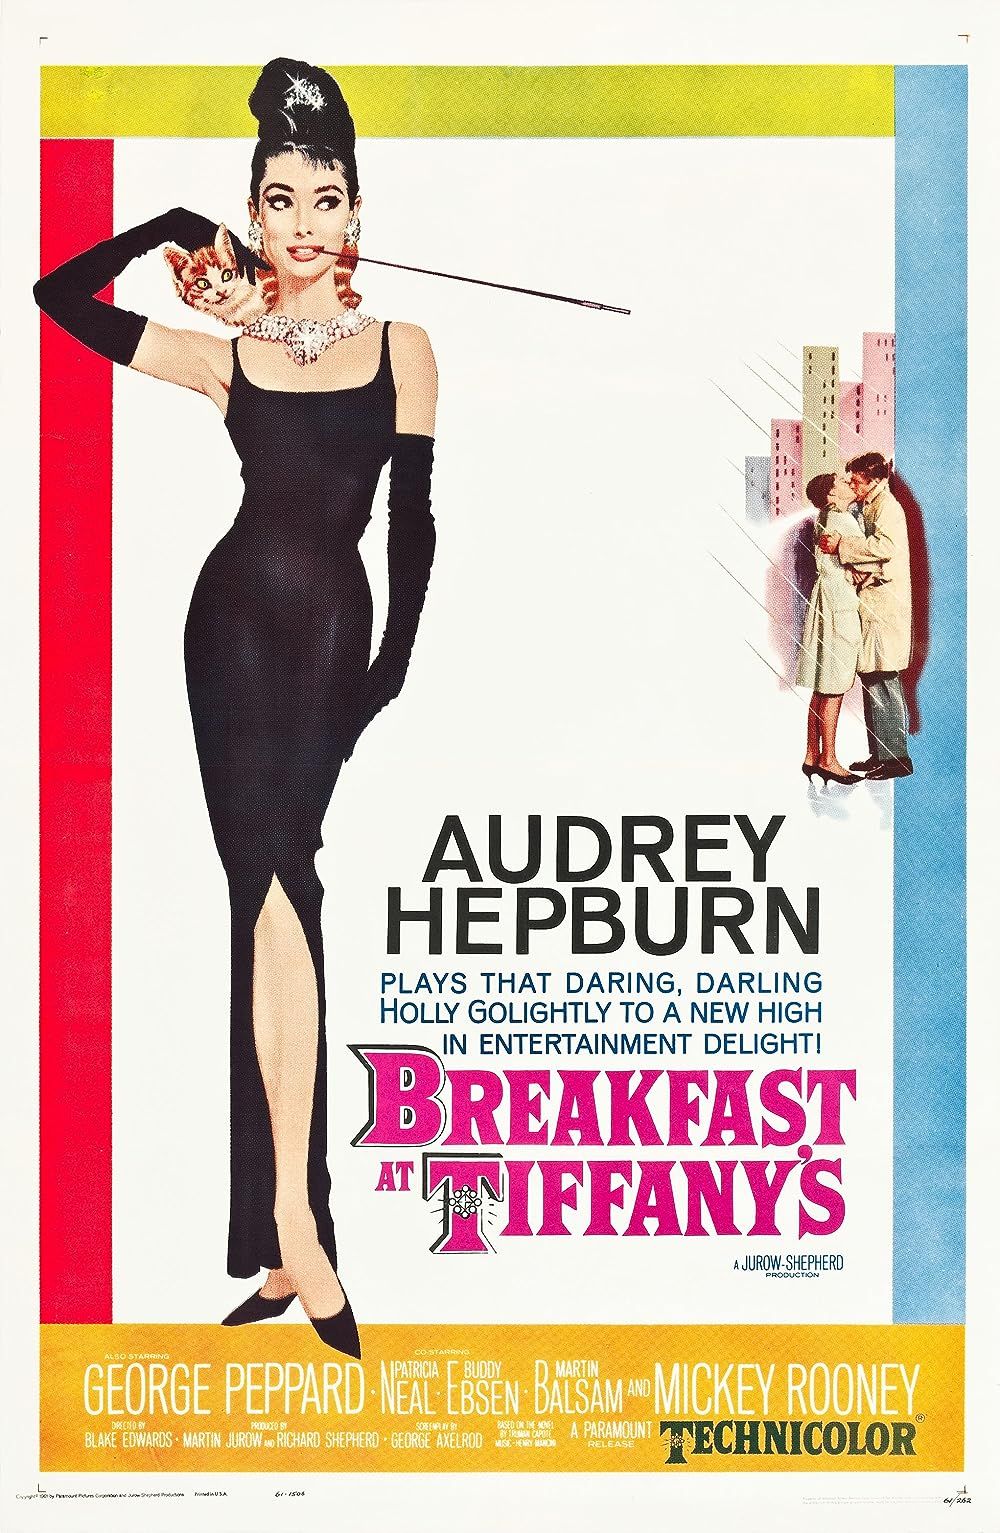 Illustrated Poster for Breakfast at Tiffany's